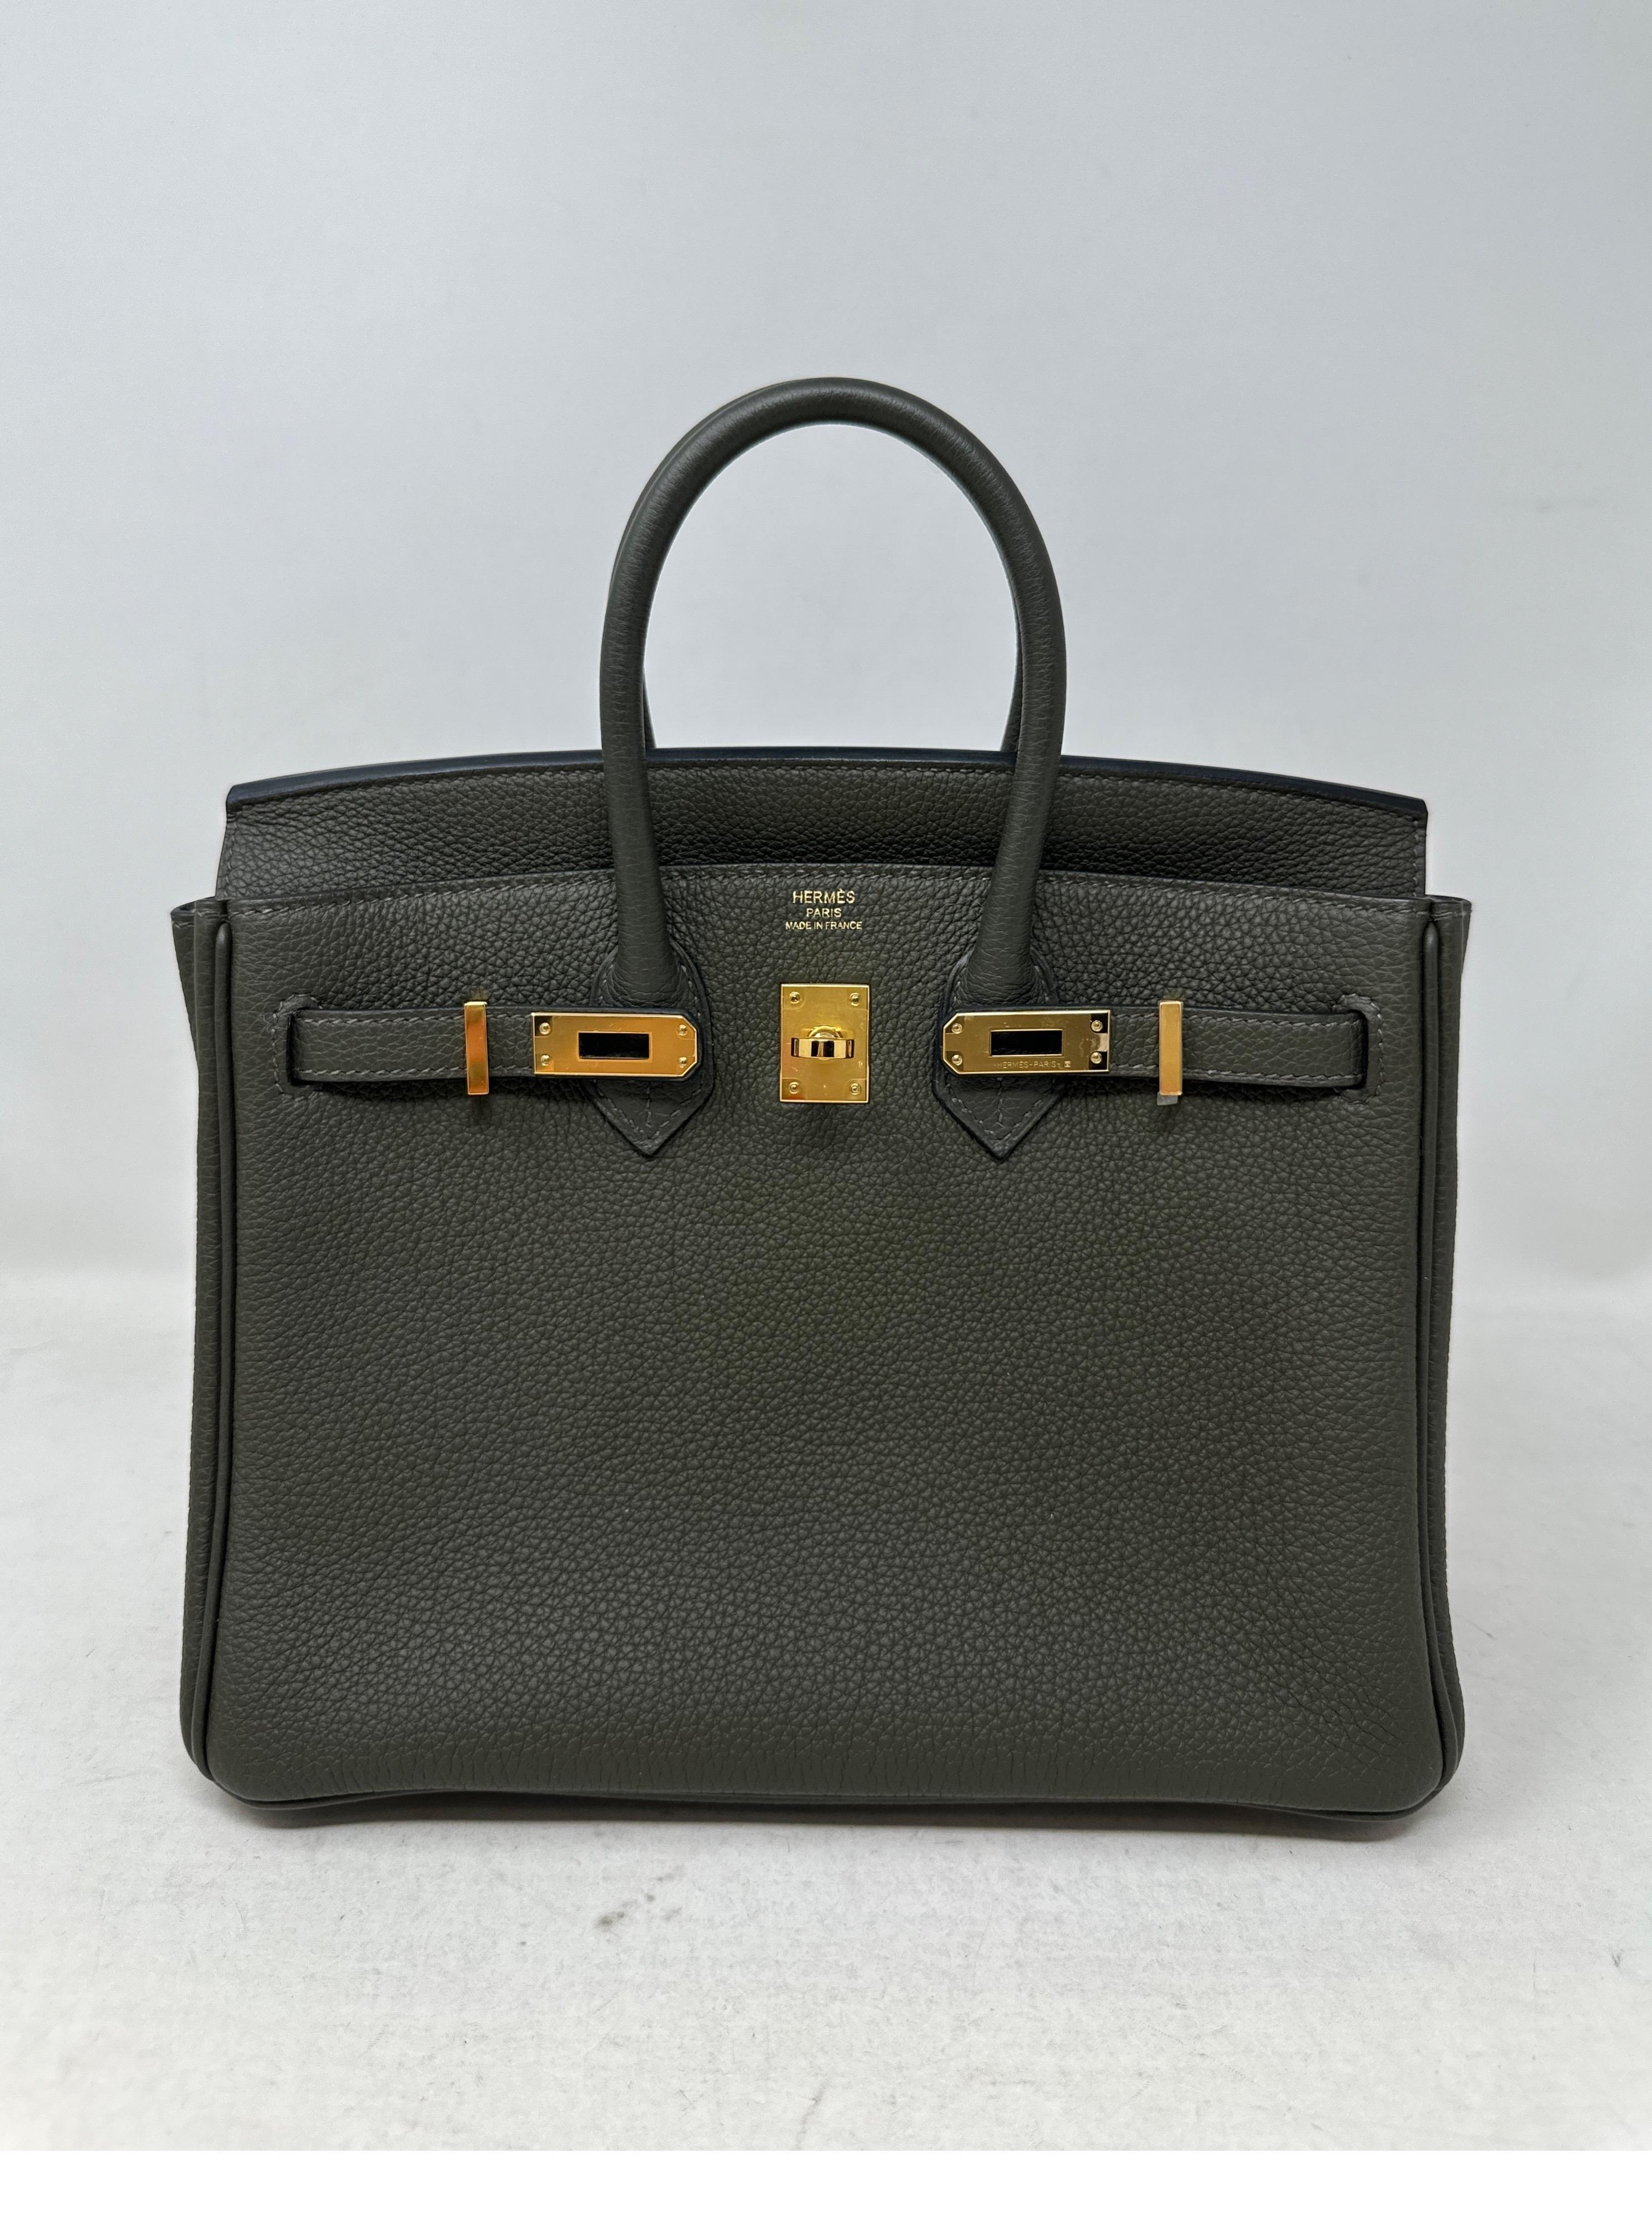 Hermes Vert De Gris Birkin 25 Bag. Rare color combination. Gold hardware. Togo leather. Brand new in box. Full set. Includes original receipt. Guaranteed authentic. Perfect gift. Investment piece. Do not miss out. 